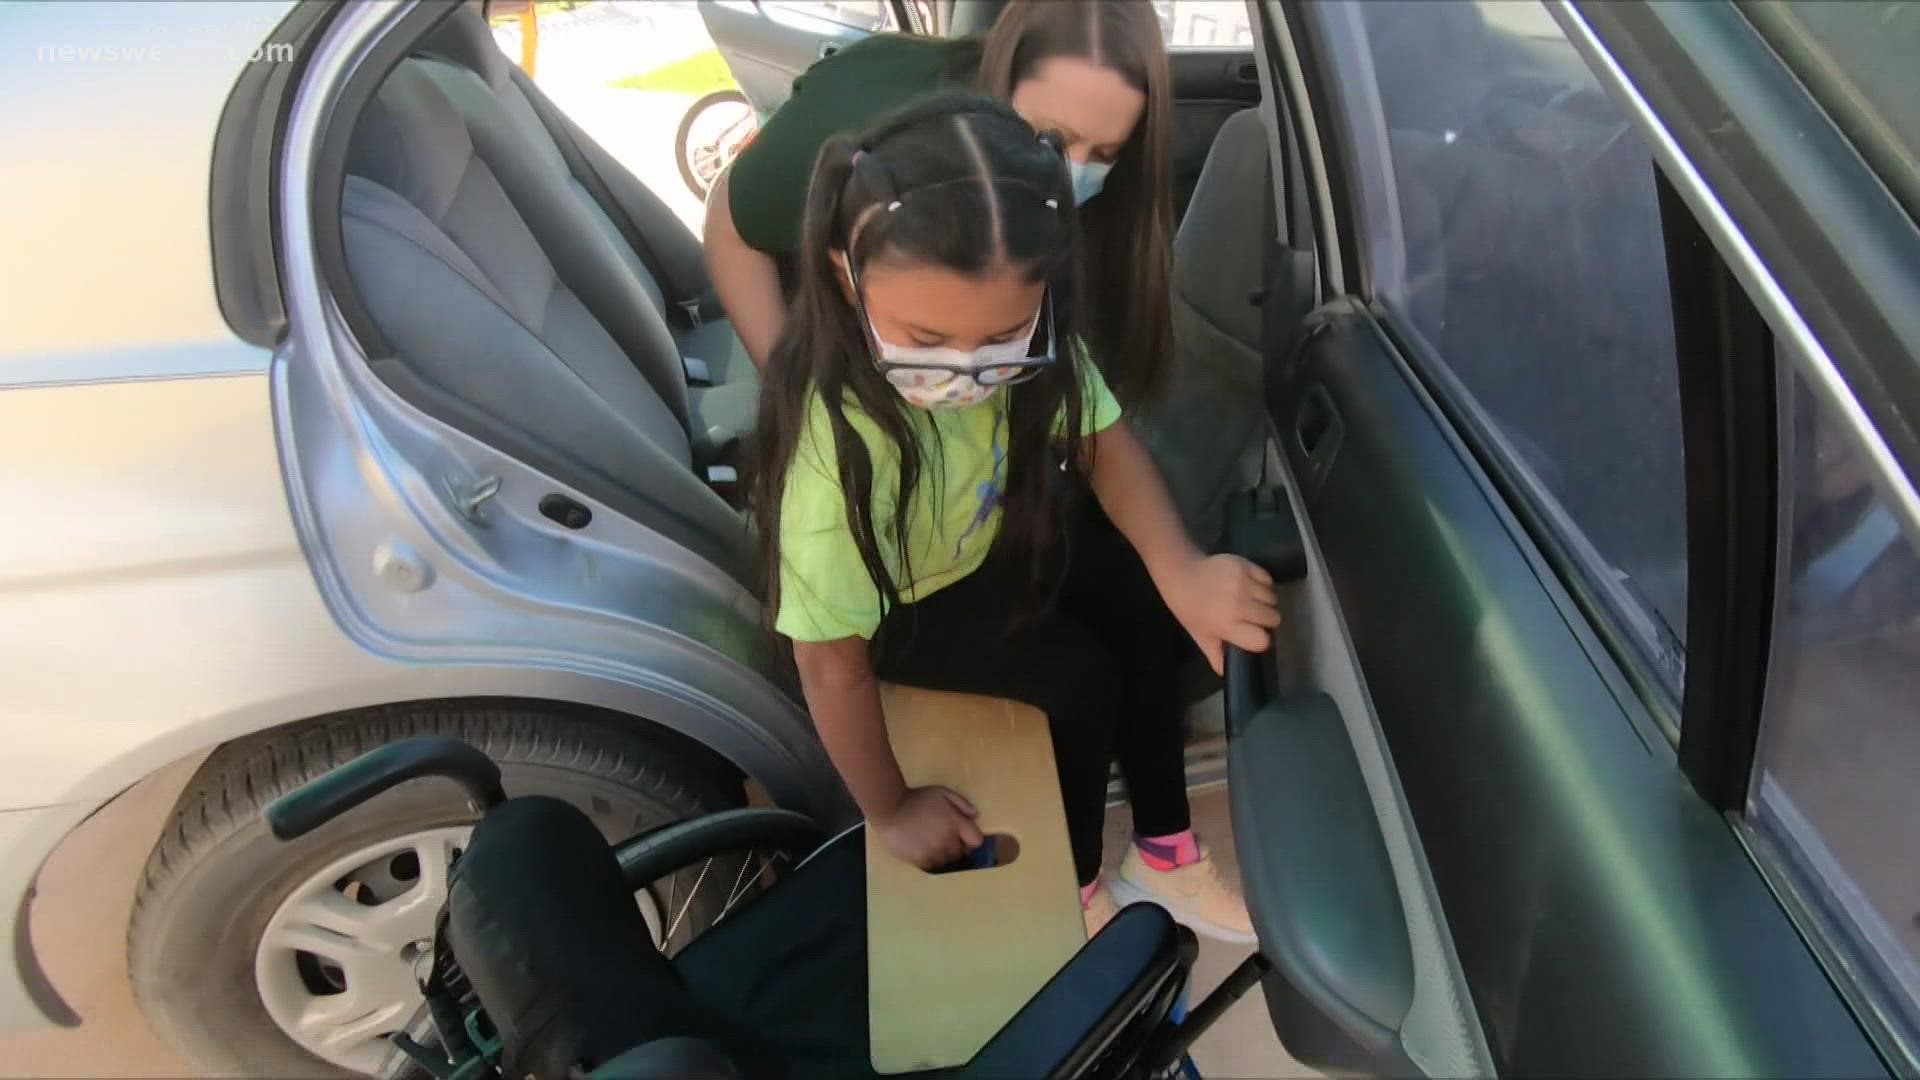 The Permian Basin Rehab Center is helping Sophie learn that just because she's in a wheelchair doesn't mean she's limited.